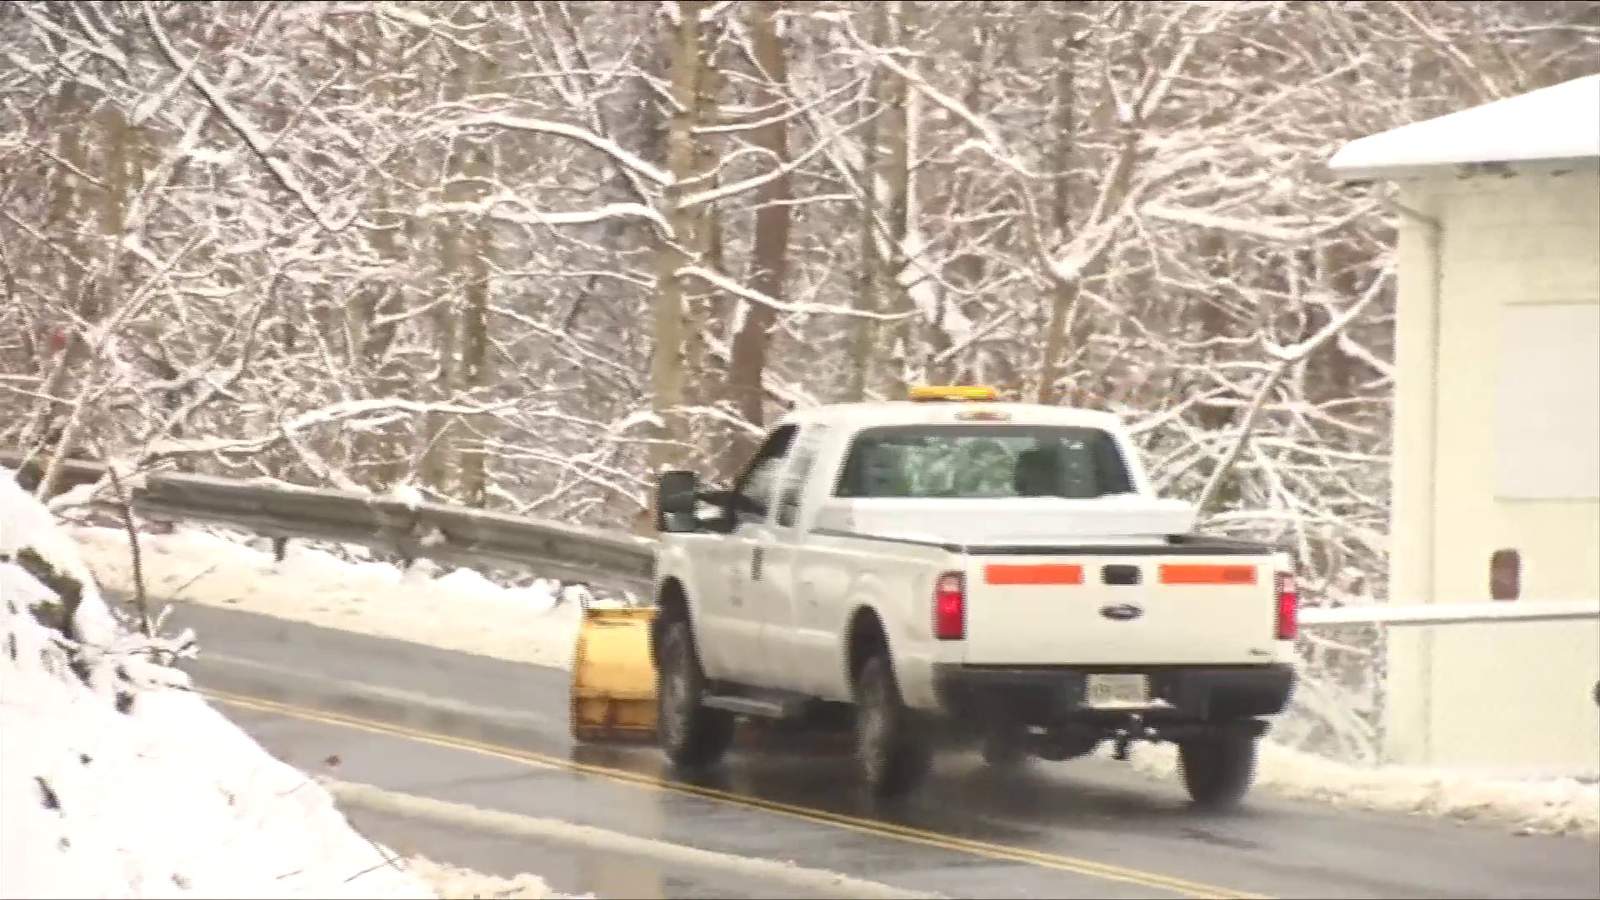 Lynchburg hires contractor for snow removal as public works department is down 15 workers